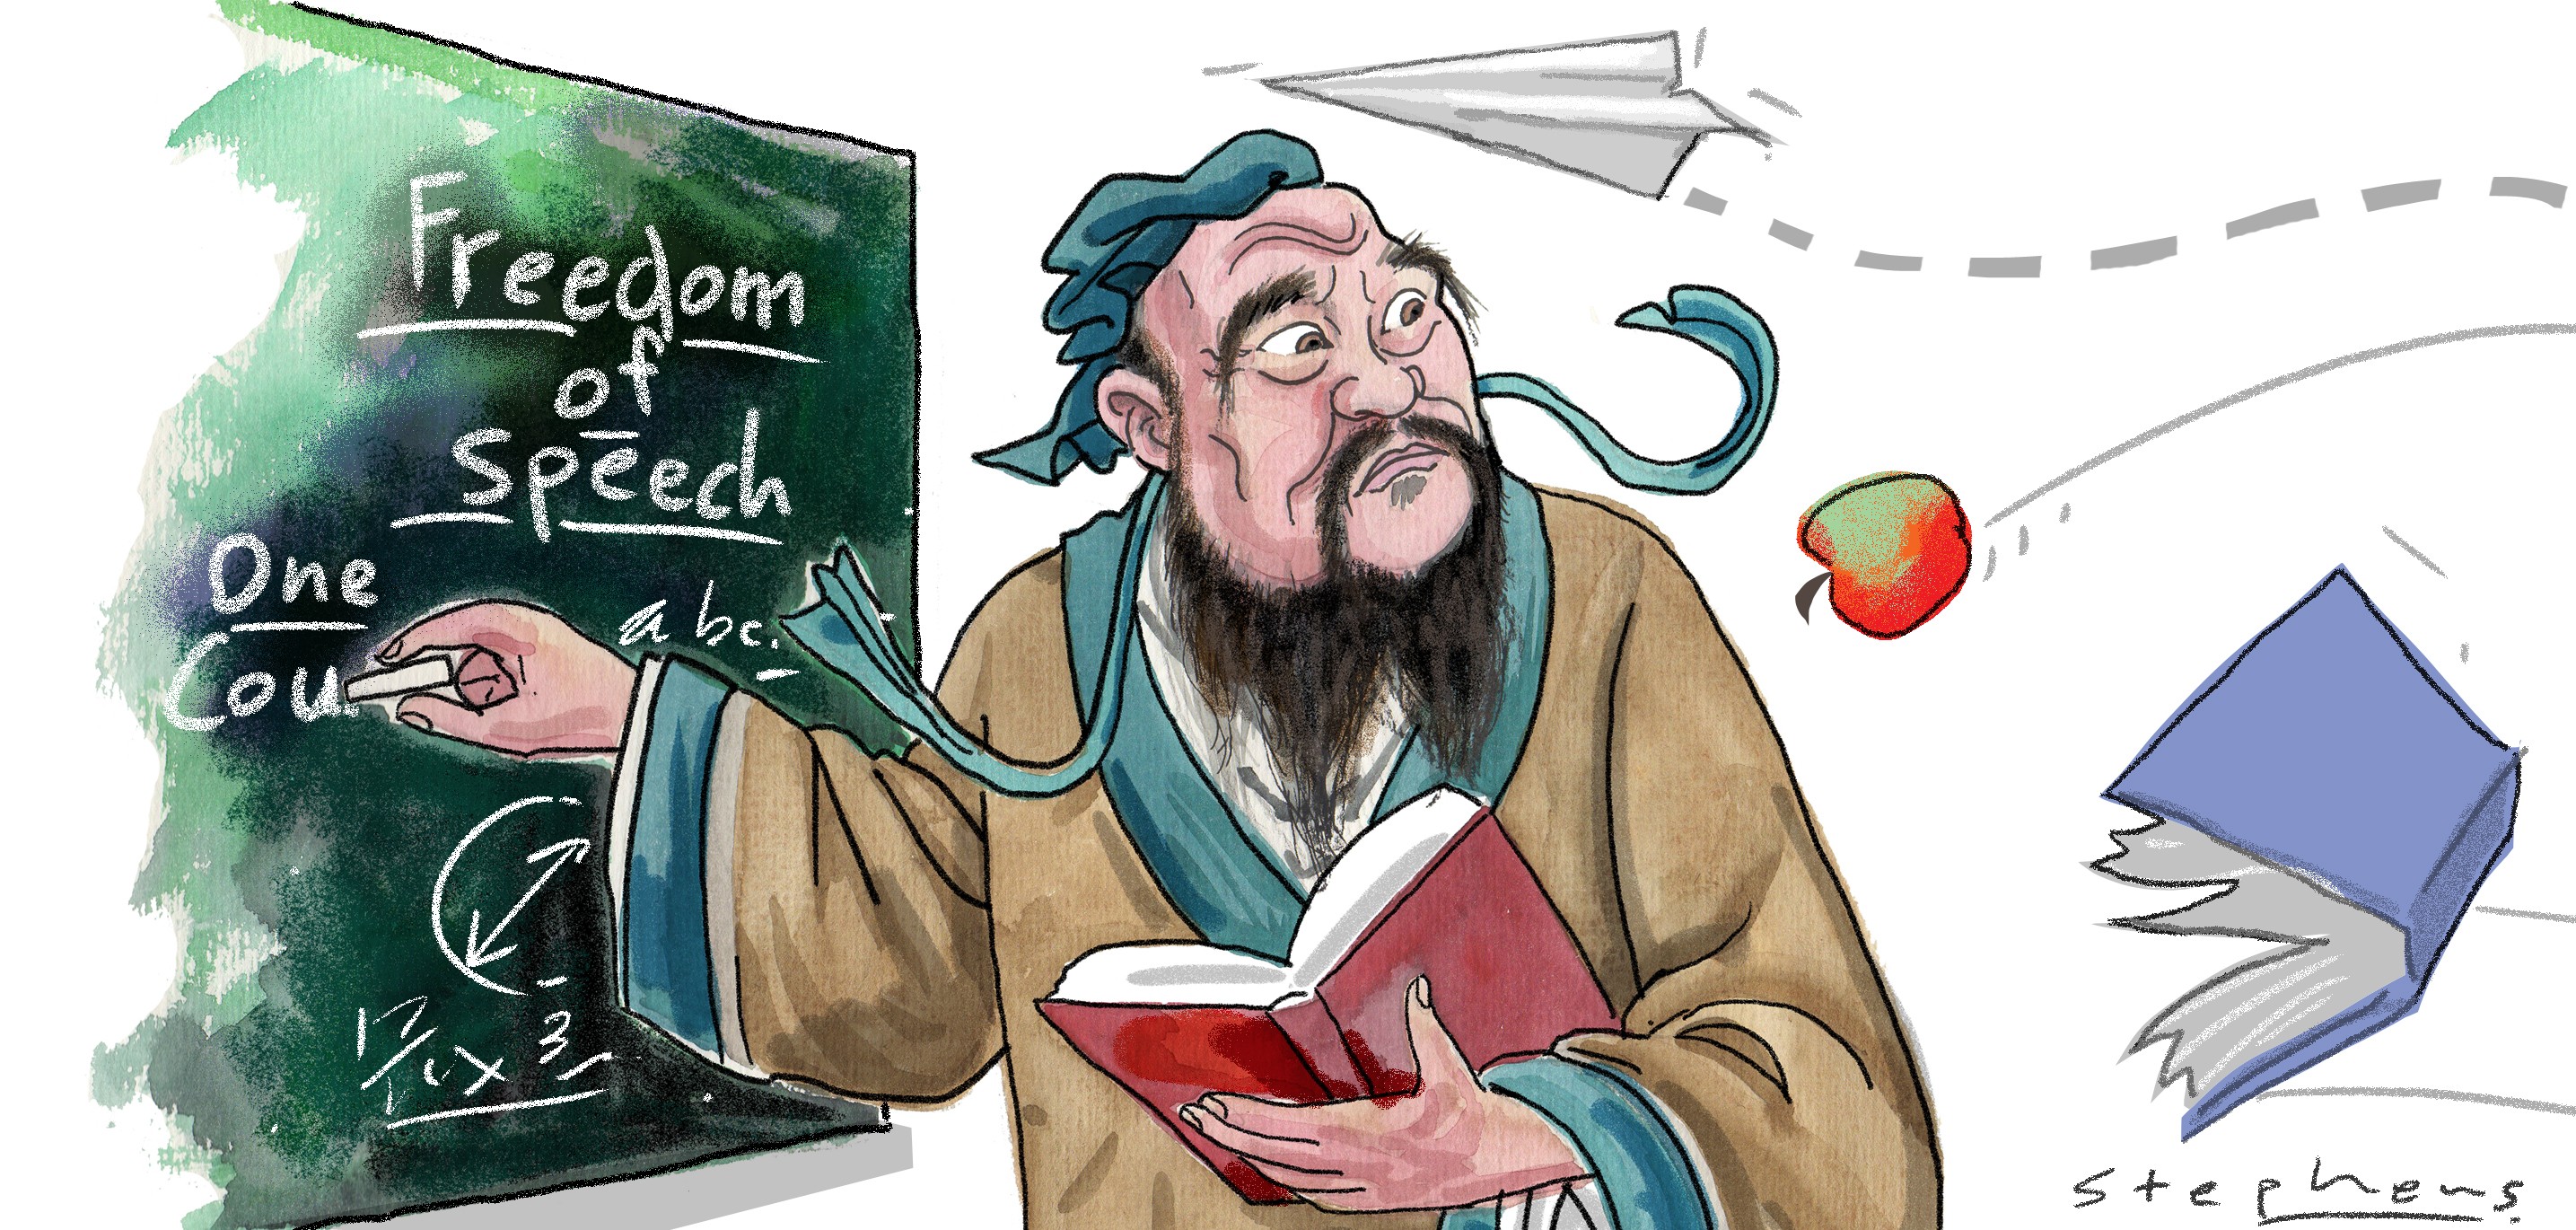 Is it possible to act according to the spirit of freedom of speech while also upholding the Confucian precept of honouring the teacher? Illustration: Craig Stephens